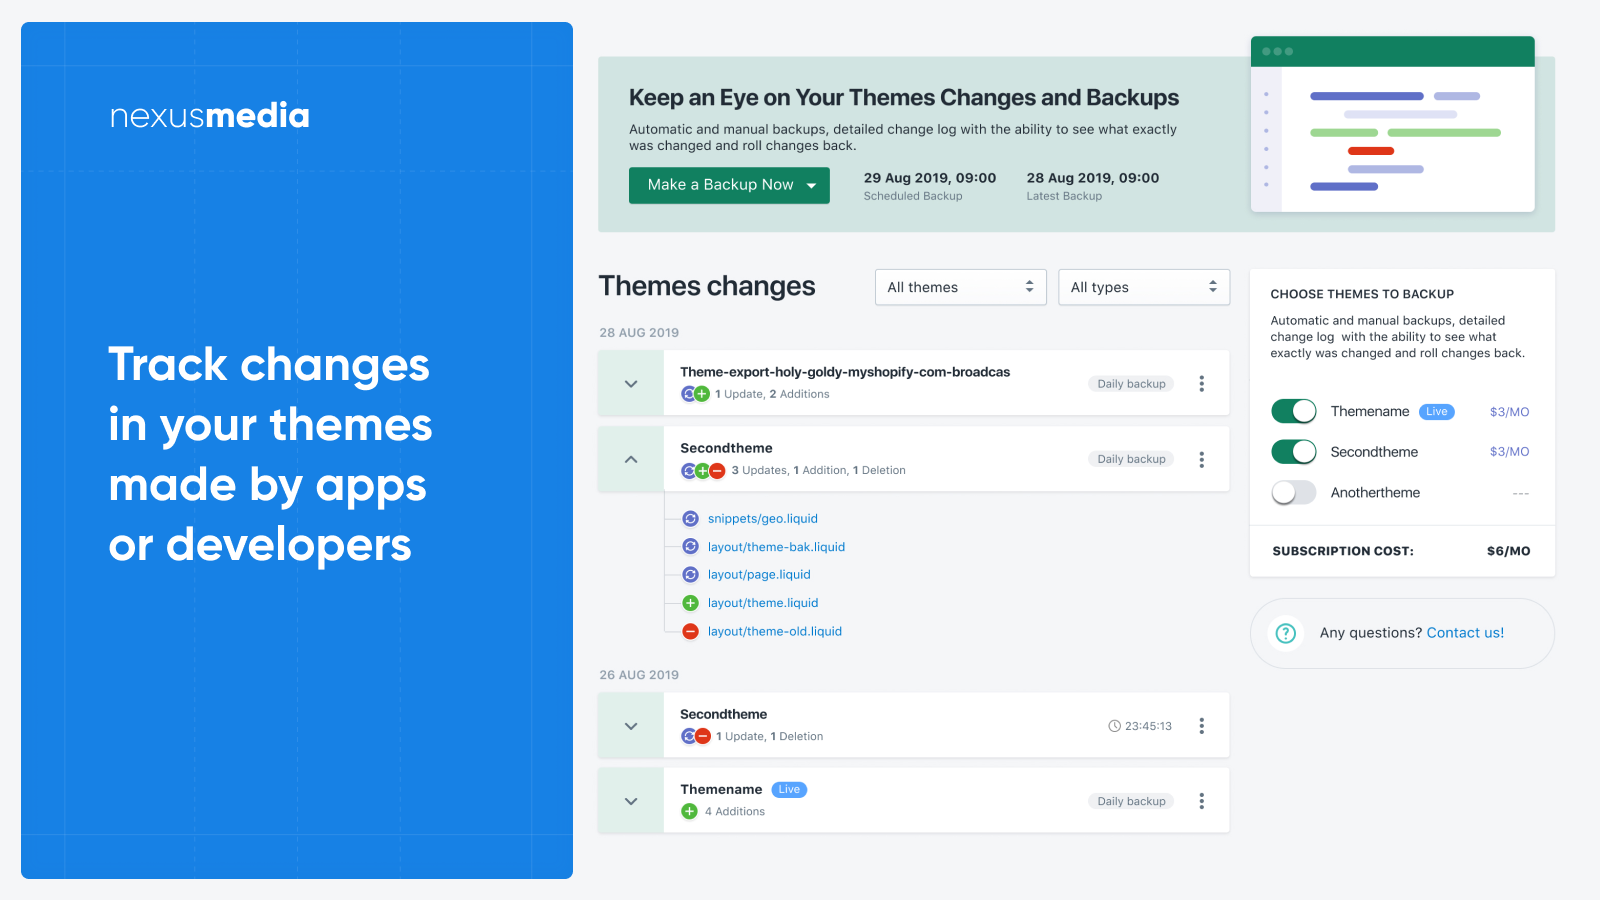 Track changes in your themes made by apps or developers, backup